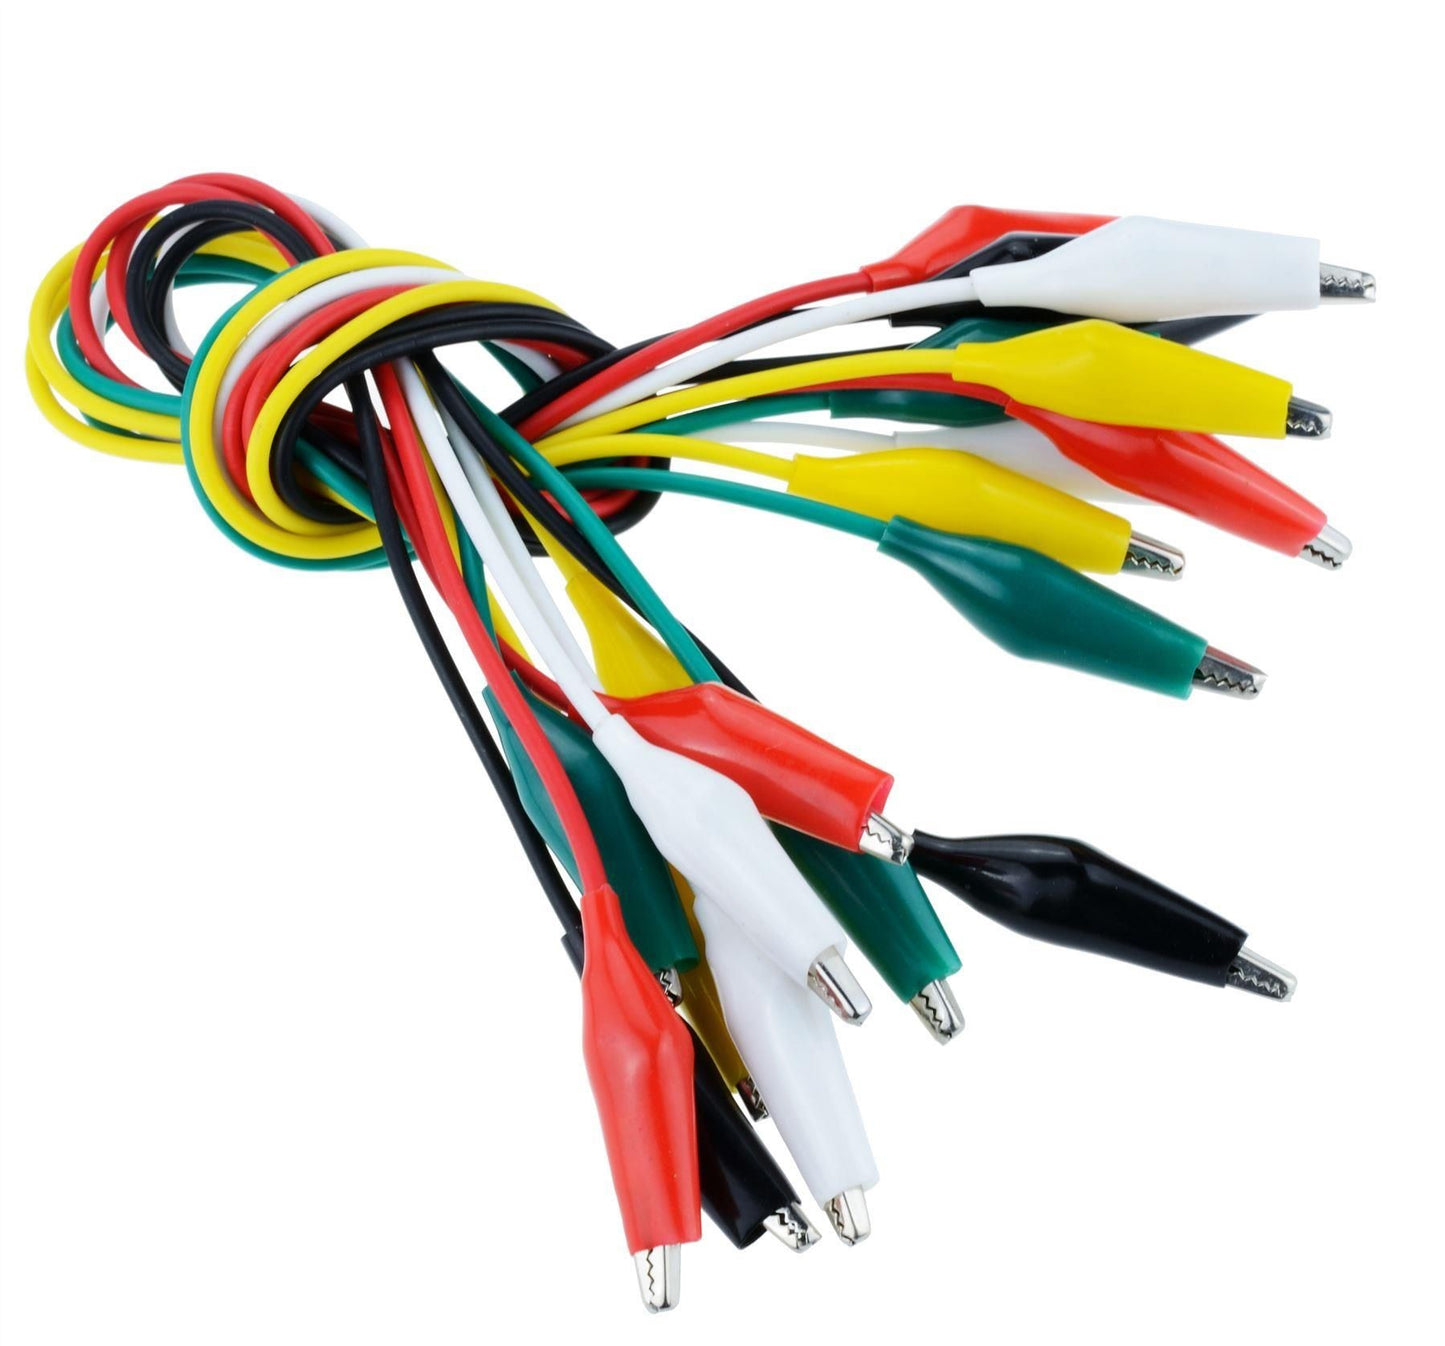 A23050 Set of 10 Test Leads